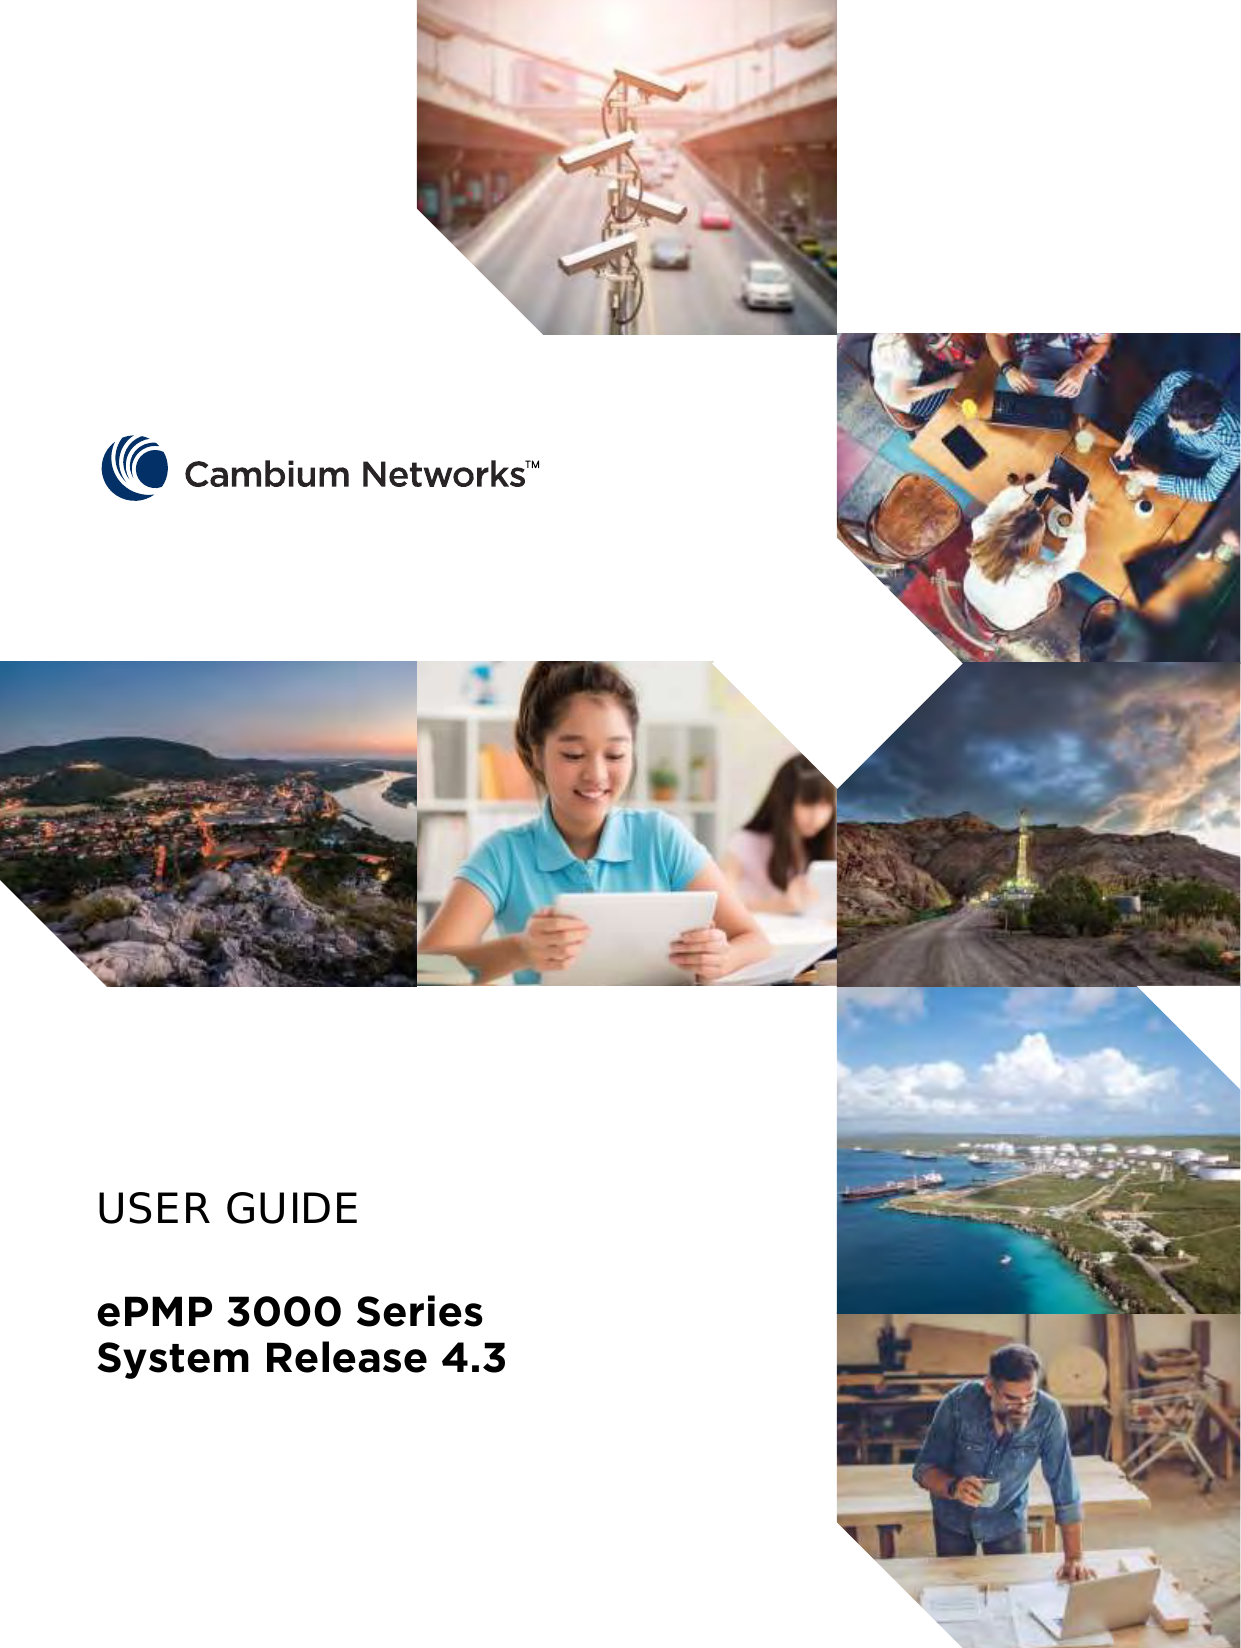  USER GUIDE ePMP 3000 Series System Release 4.3                               